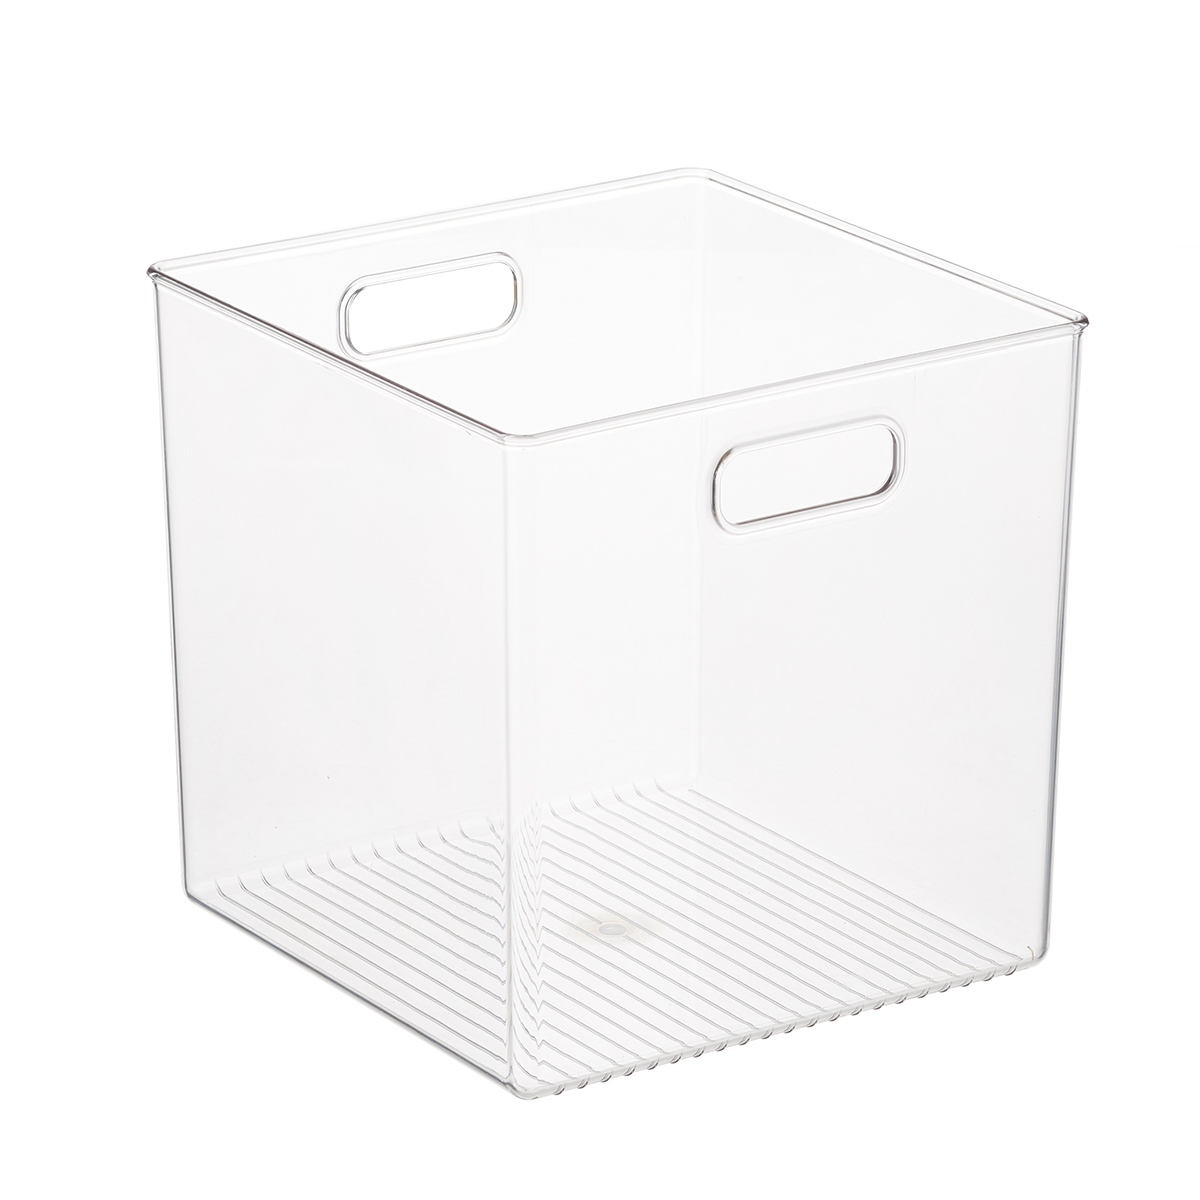 https://www.containerstore.com/catalogimages/373602/10079280-linus-cube-bin-with-handles.jpg